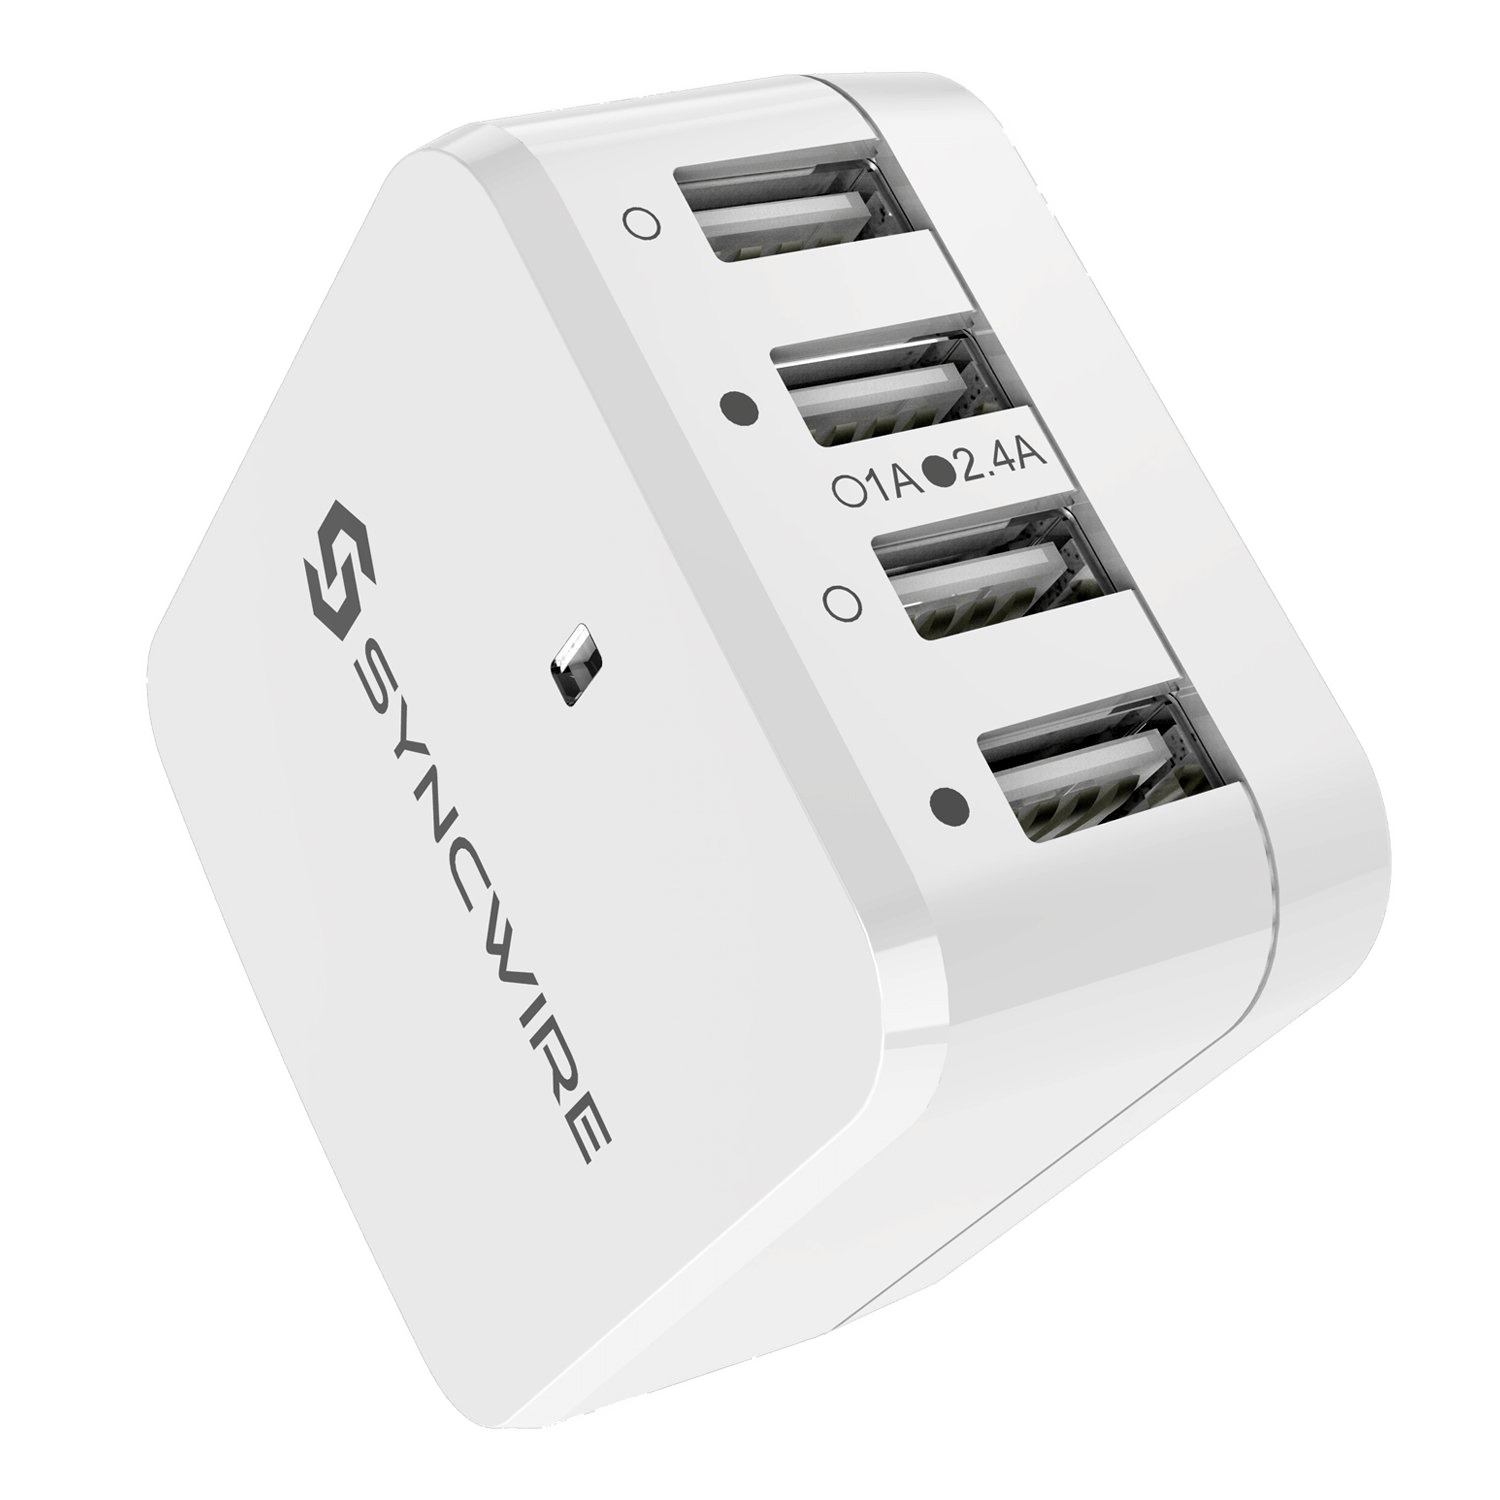 Syncwire USB Charger icons